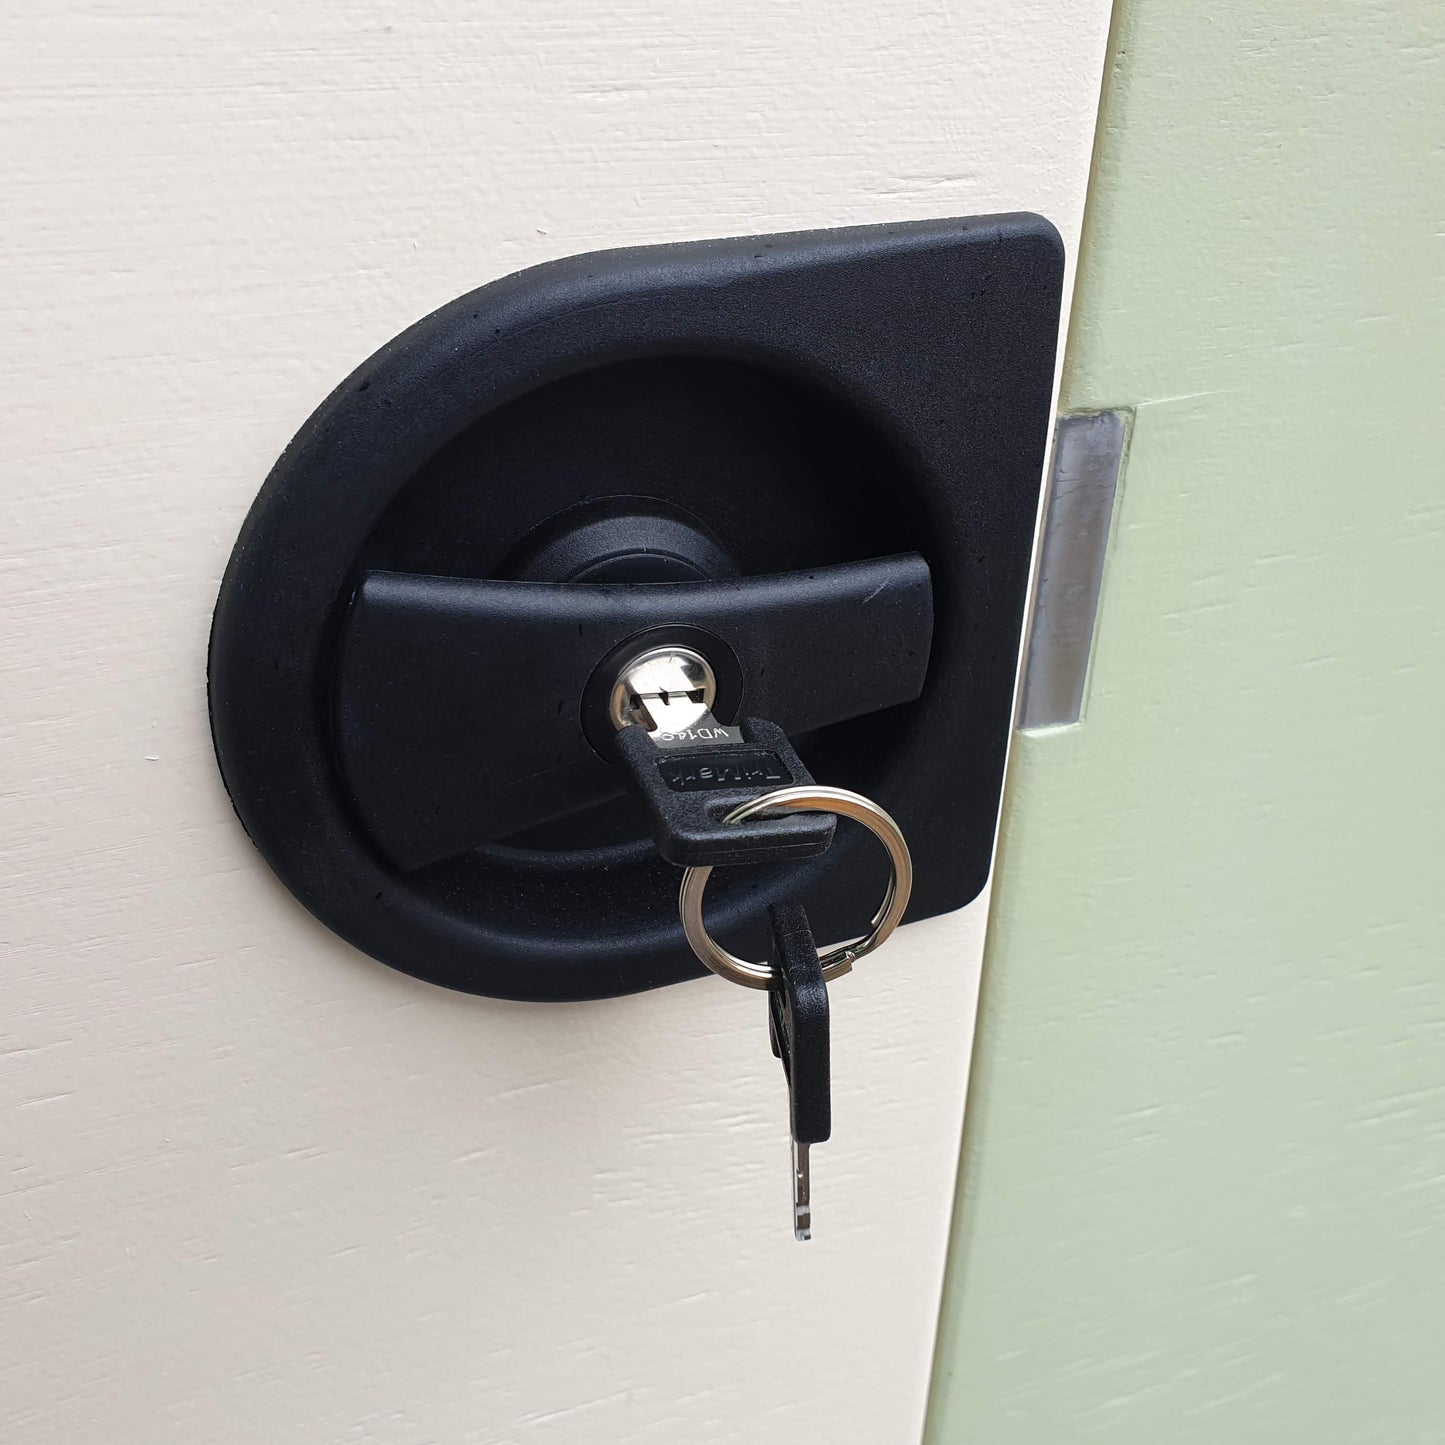 Caraloc 2000 Locking door handle with two keys (lockable from the inside without key) Keep your valuables safe when away from camp and lock the world out when inside.